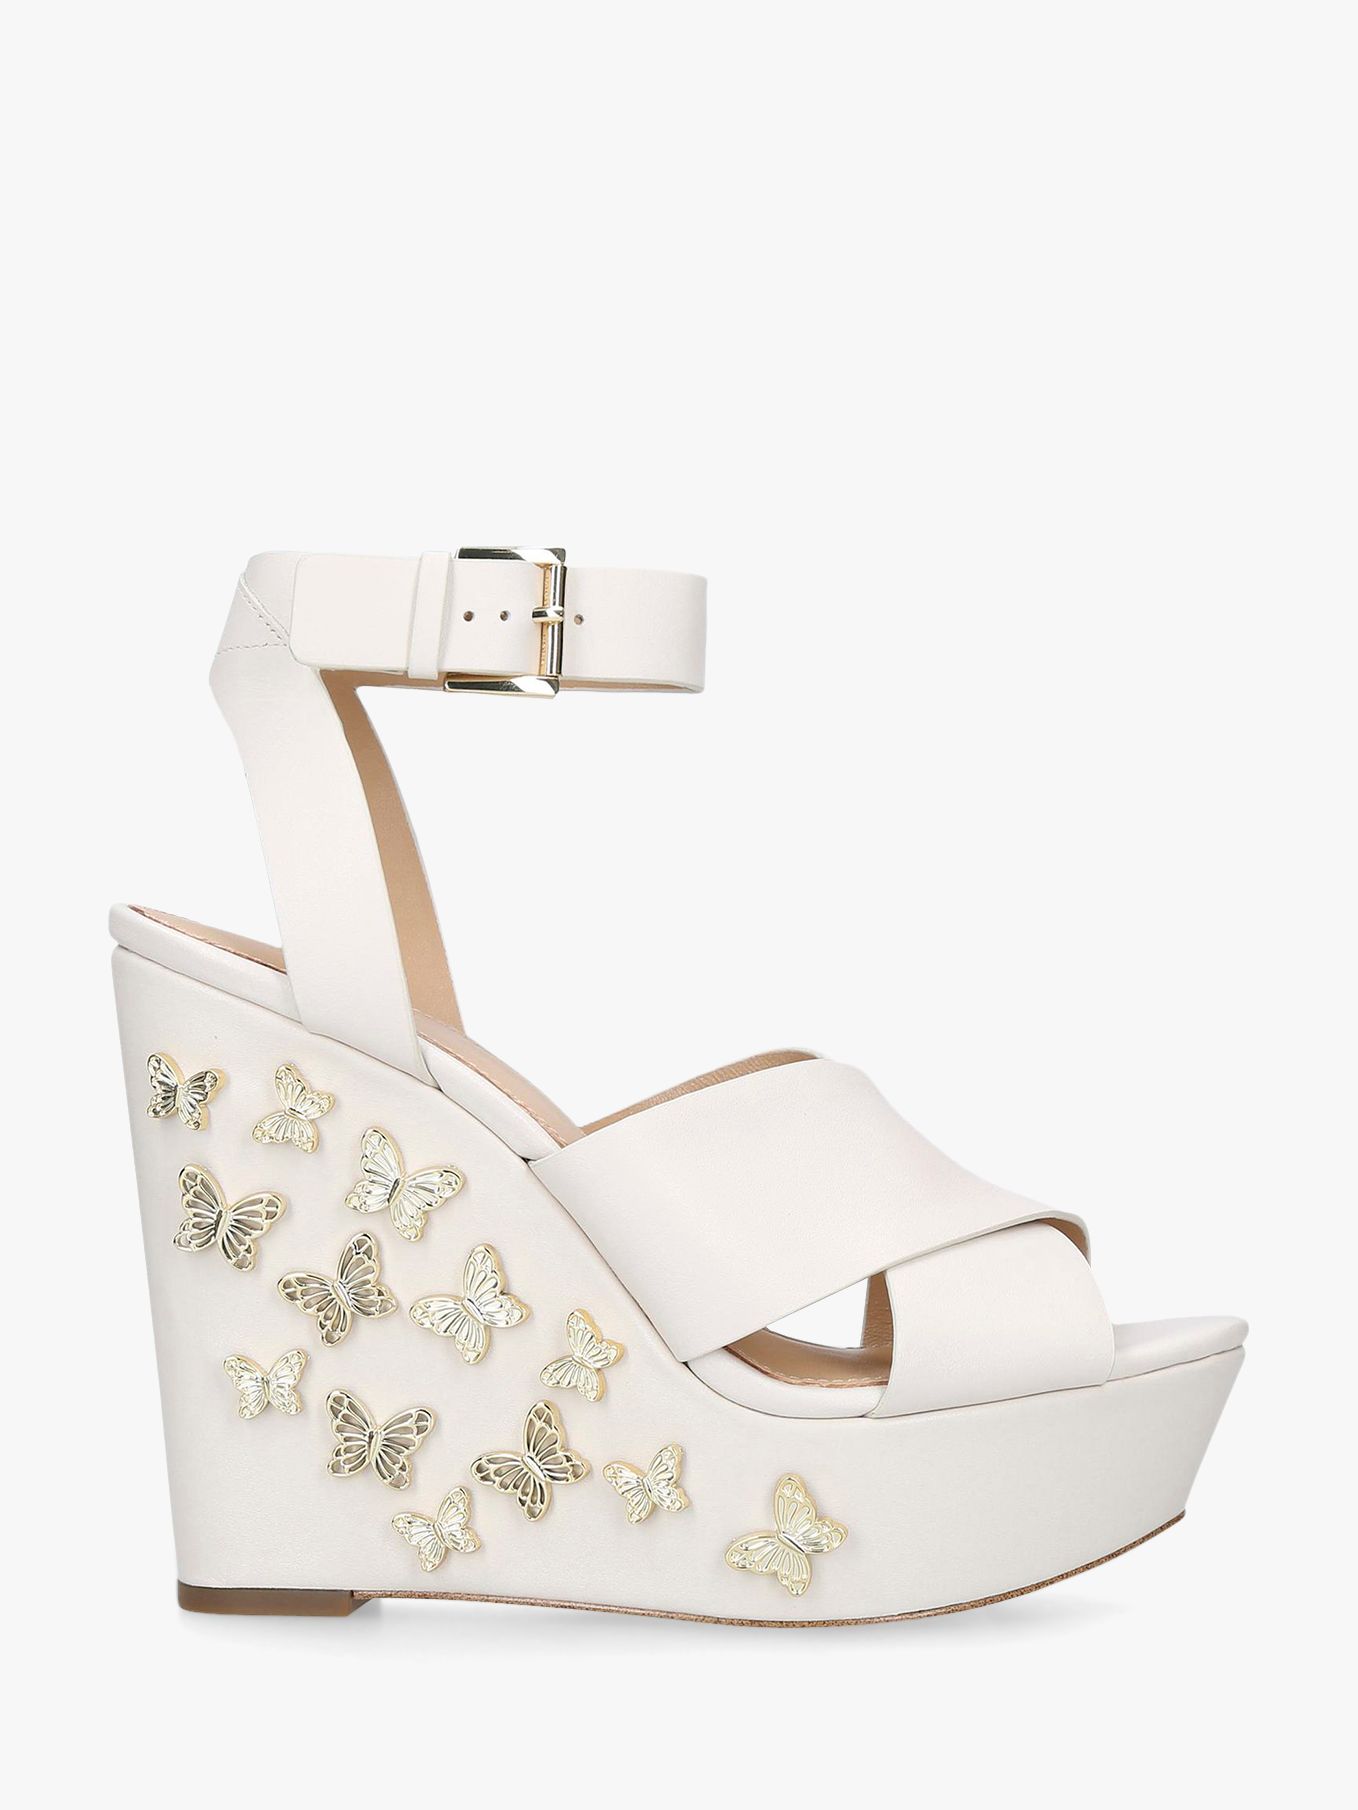 michael kors butterfly shoes